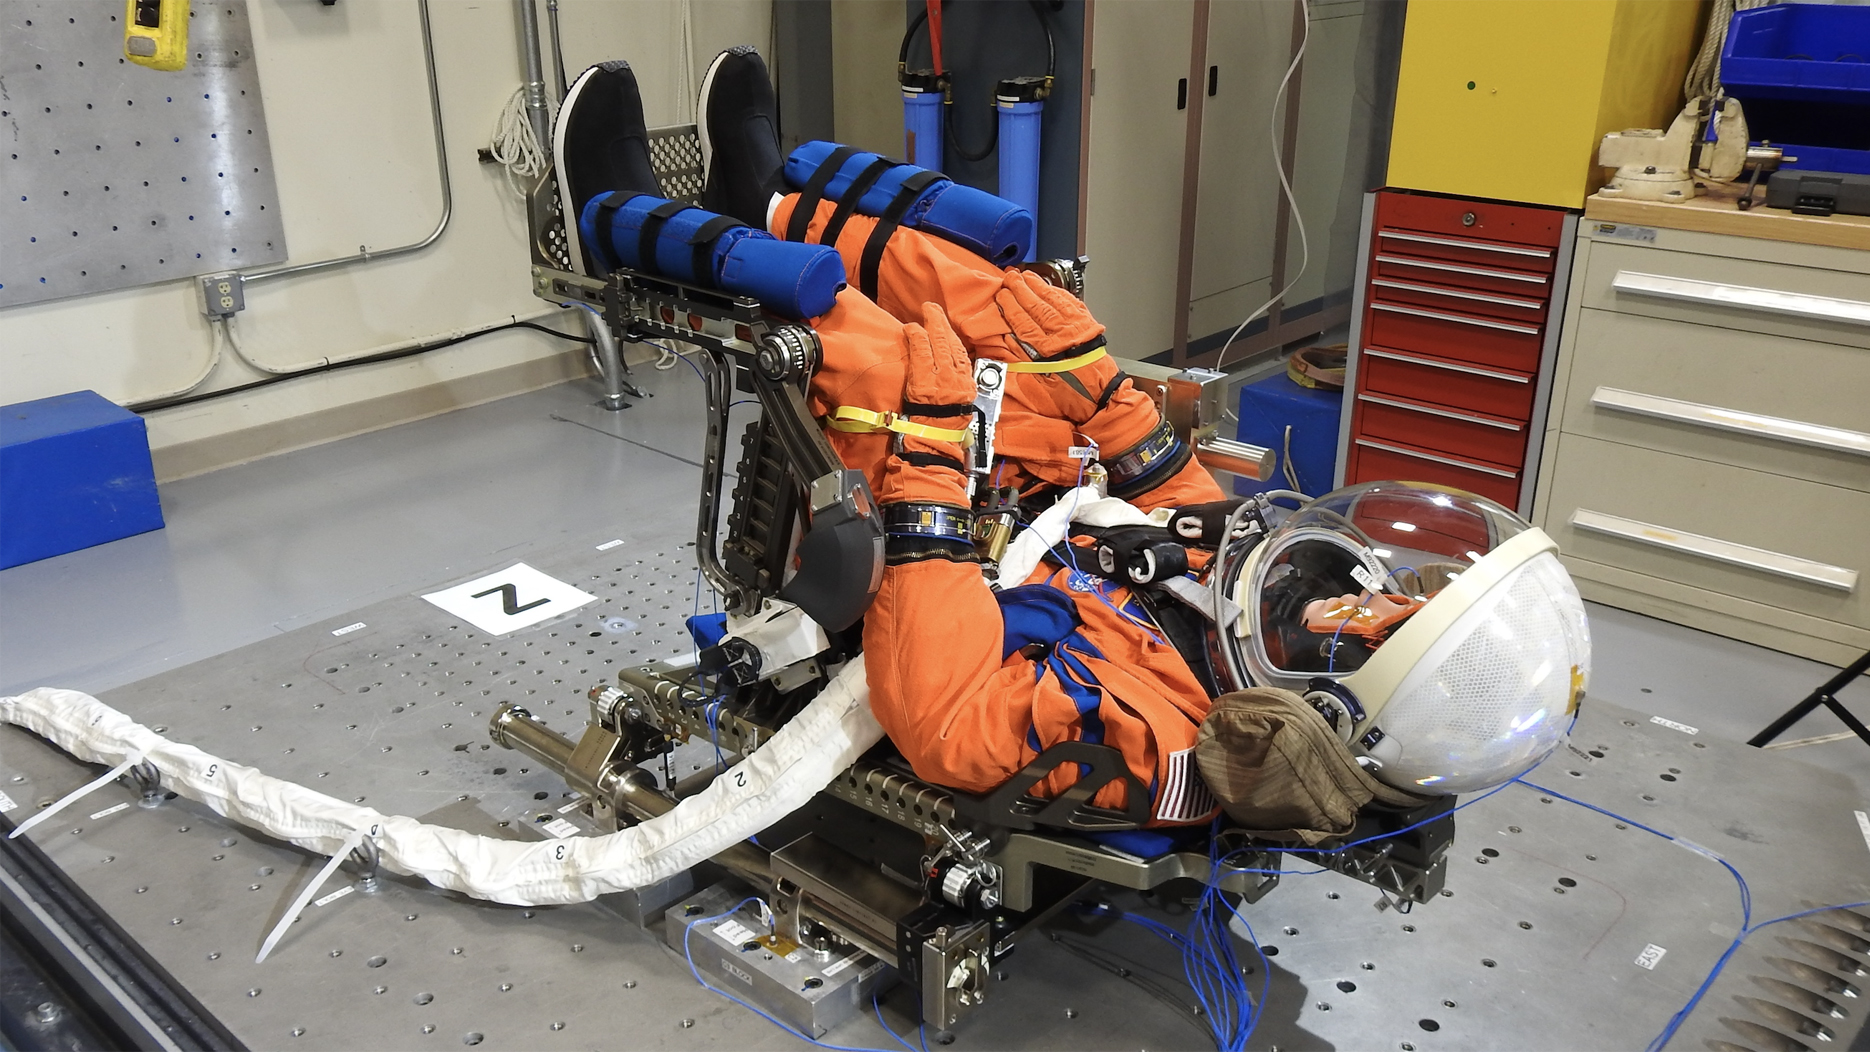 NASA's "Moonikin" mannequin in an orange spacesuits sitting in launch position.